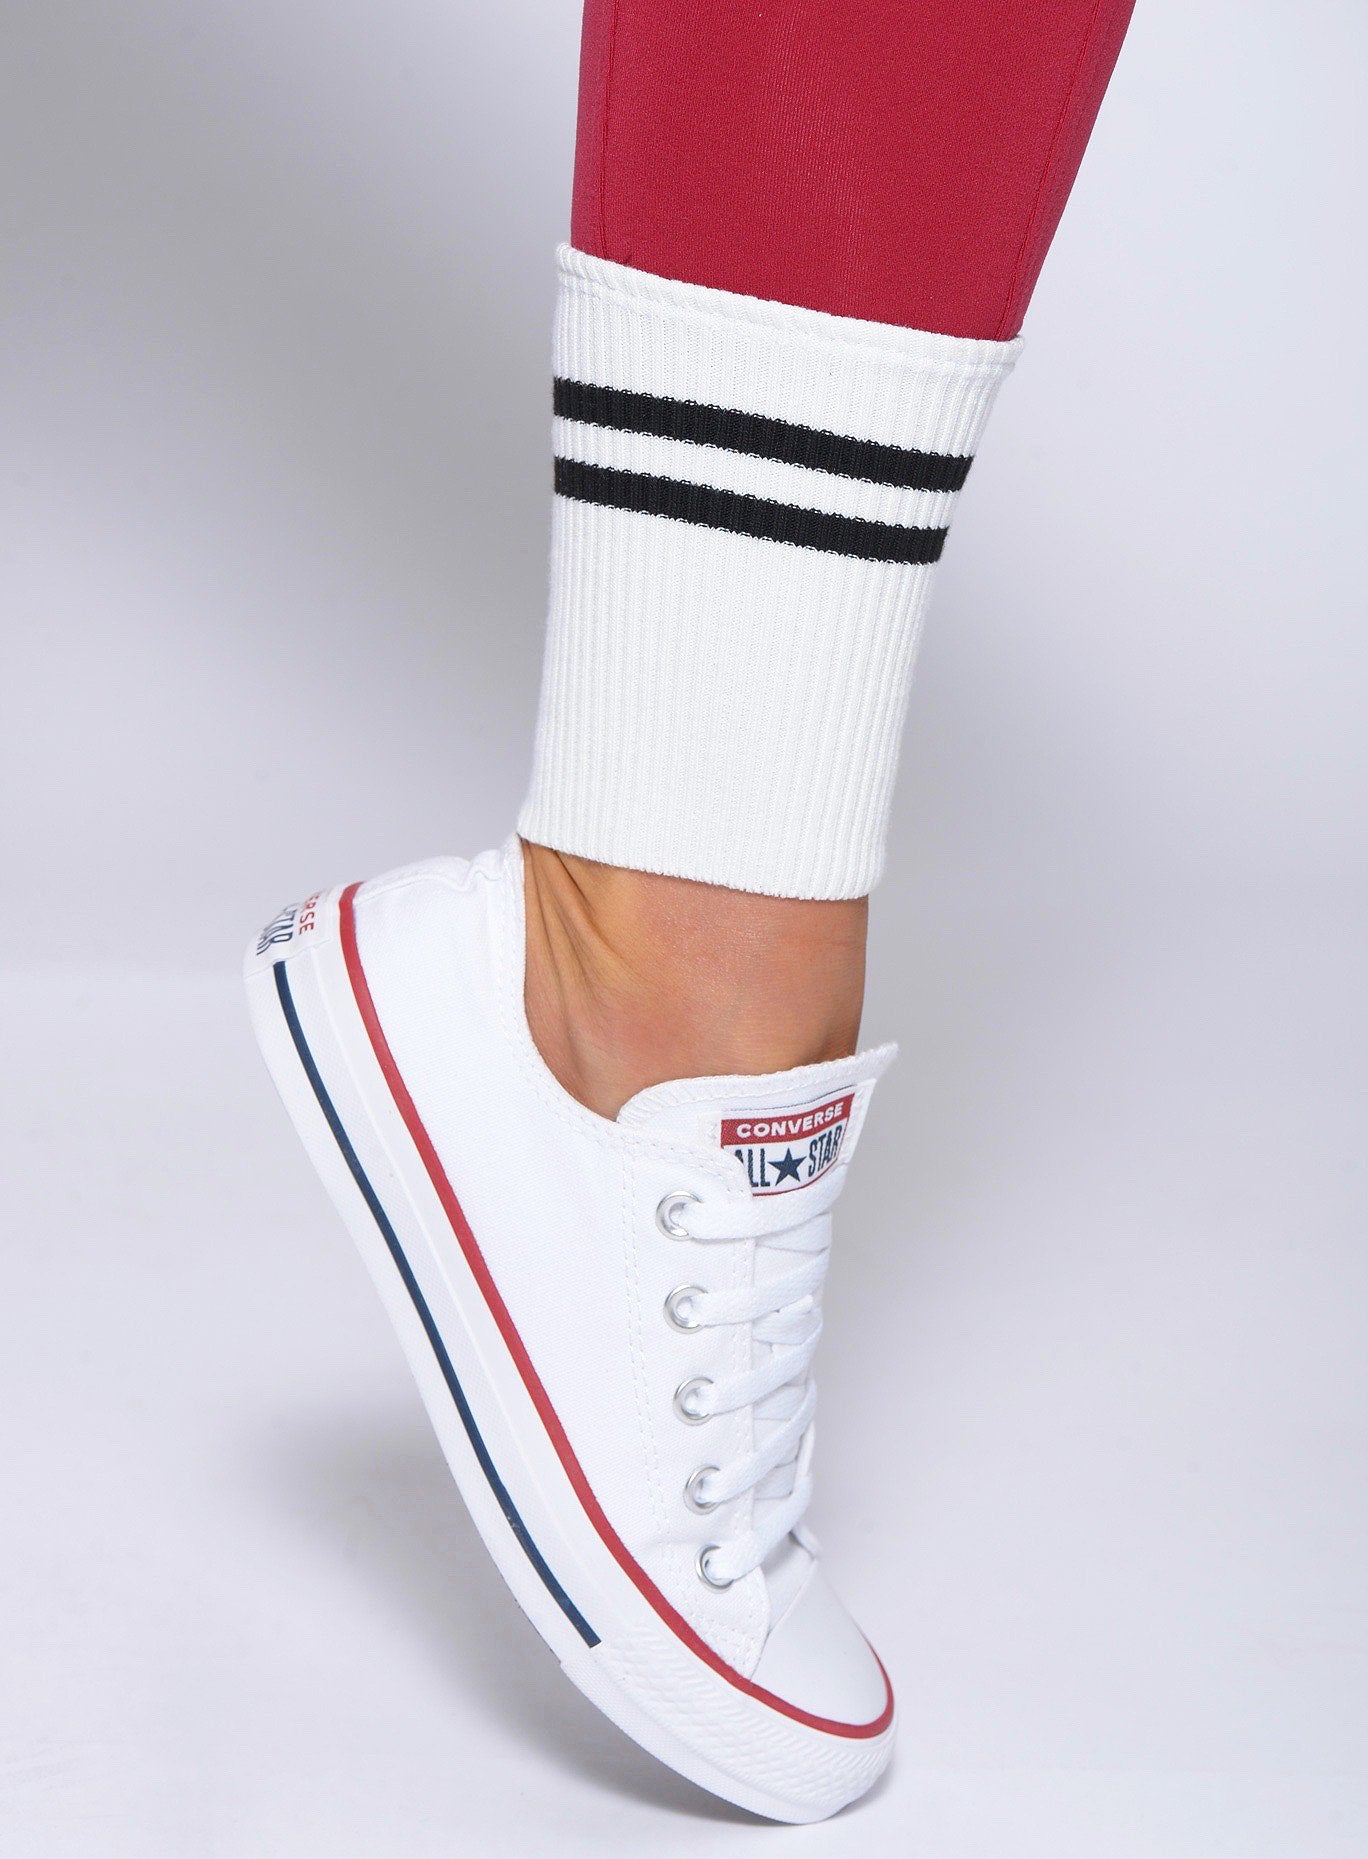 Enlarged view of the ankle portion of the Ankle Sock leggings in maroon showing the stripes 